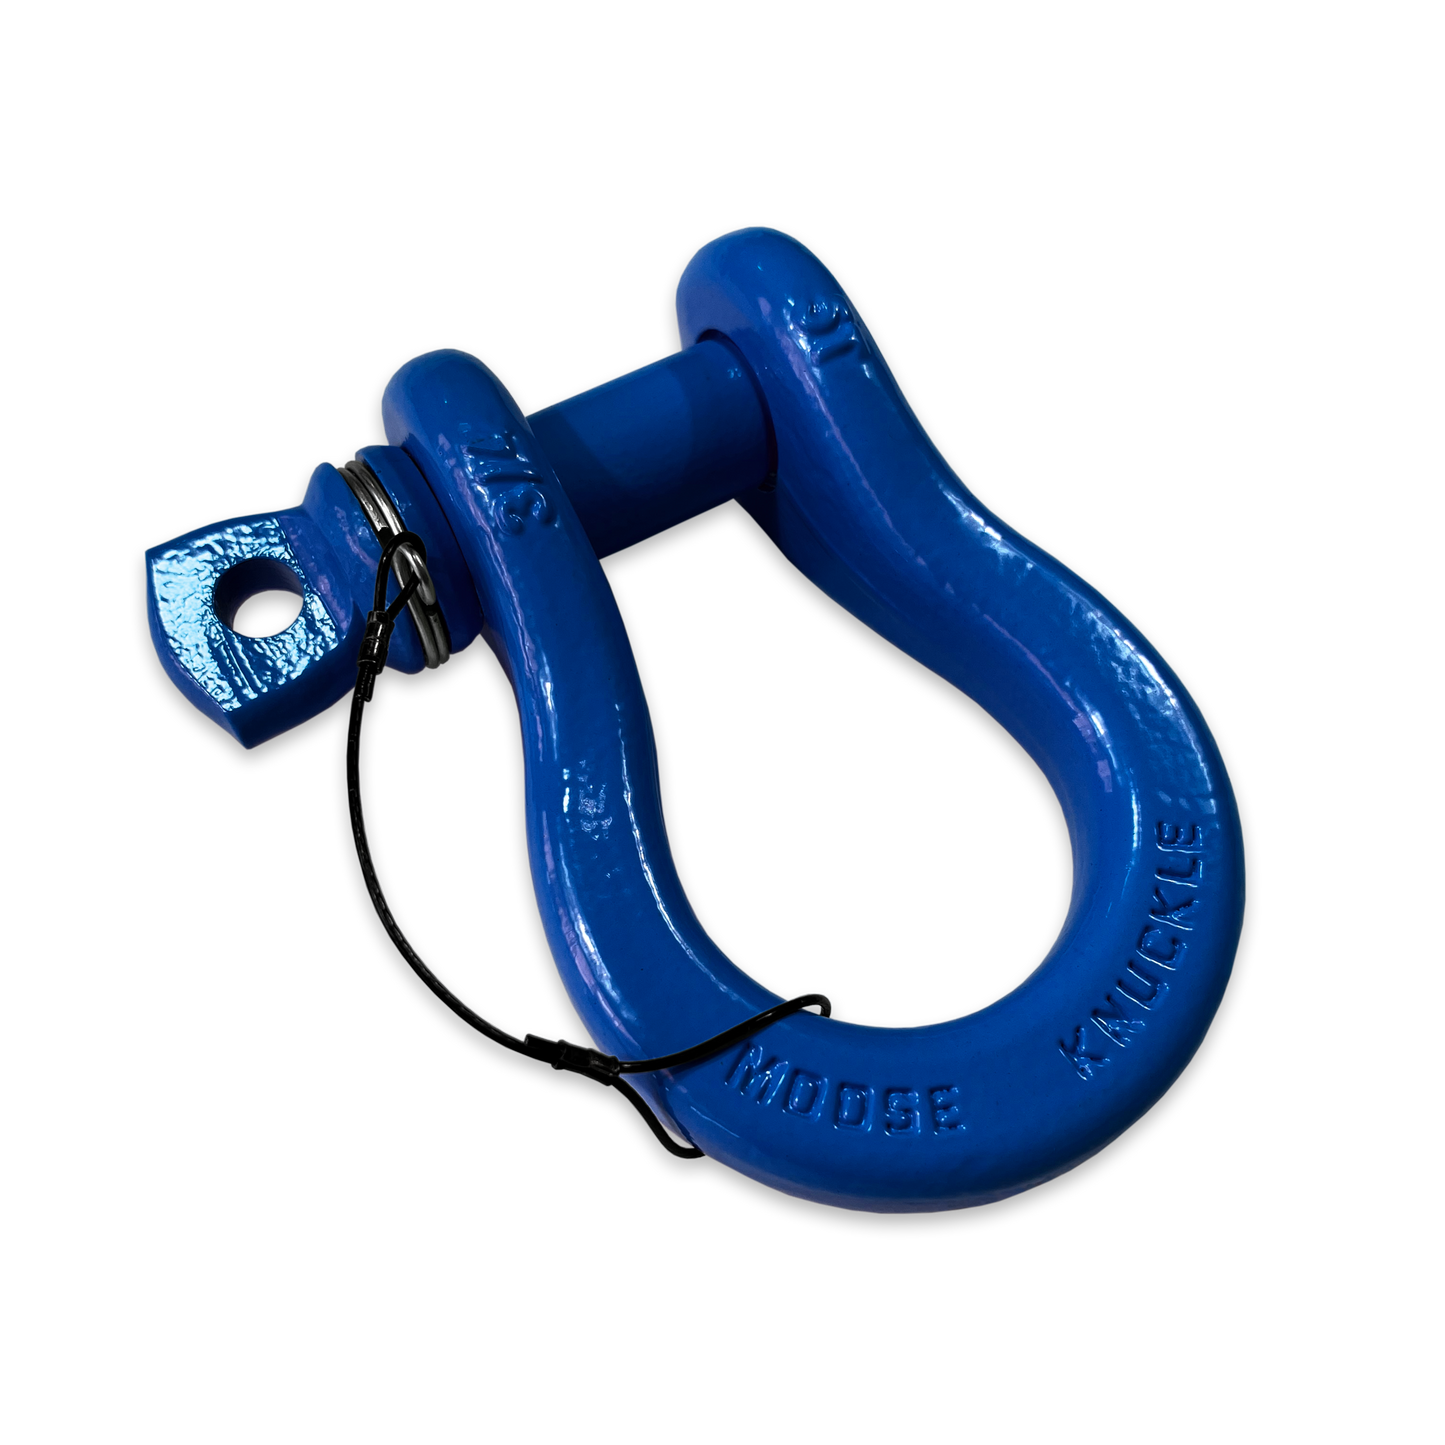 B'oh Recovery Spin Pin Shackle